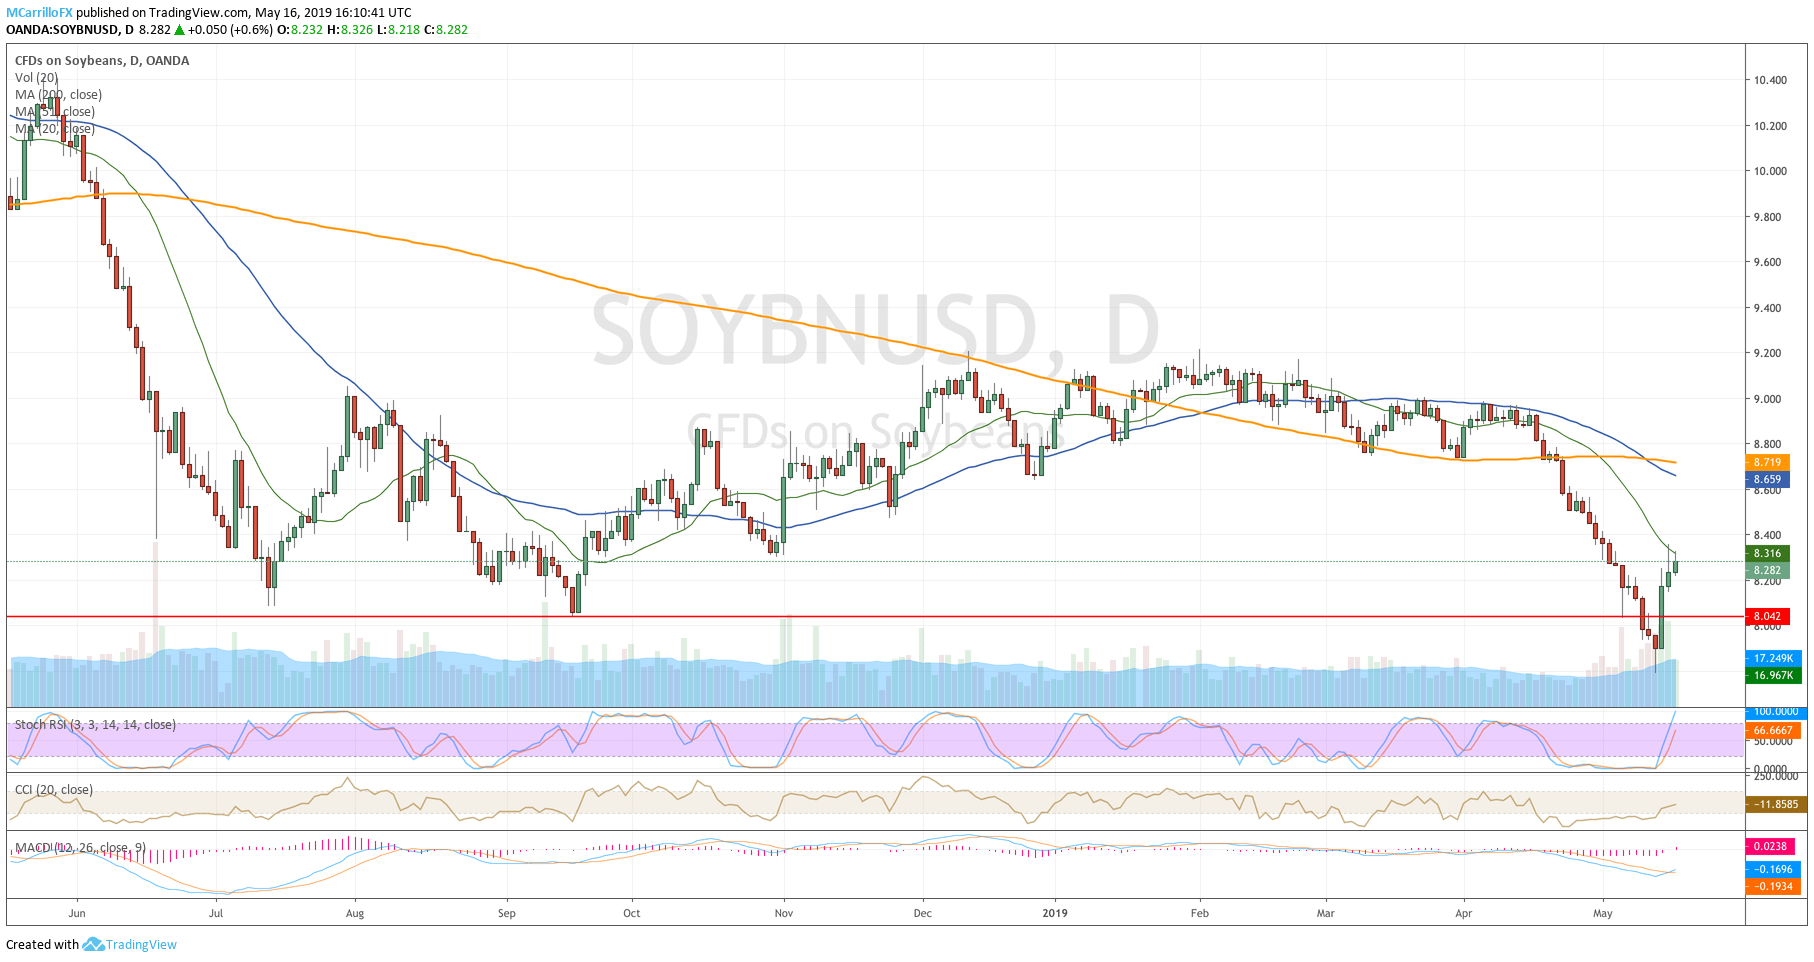 Soybeans daily chart last year